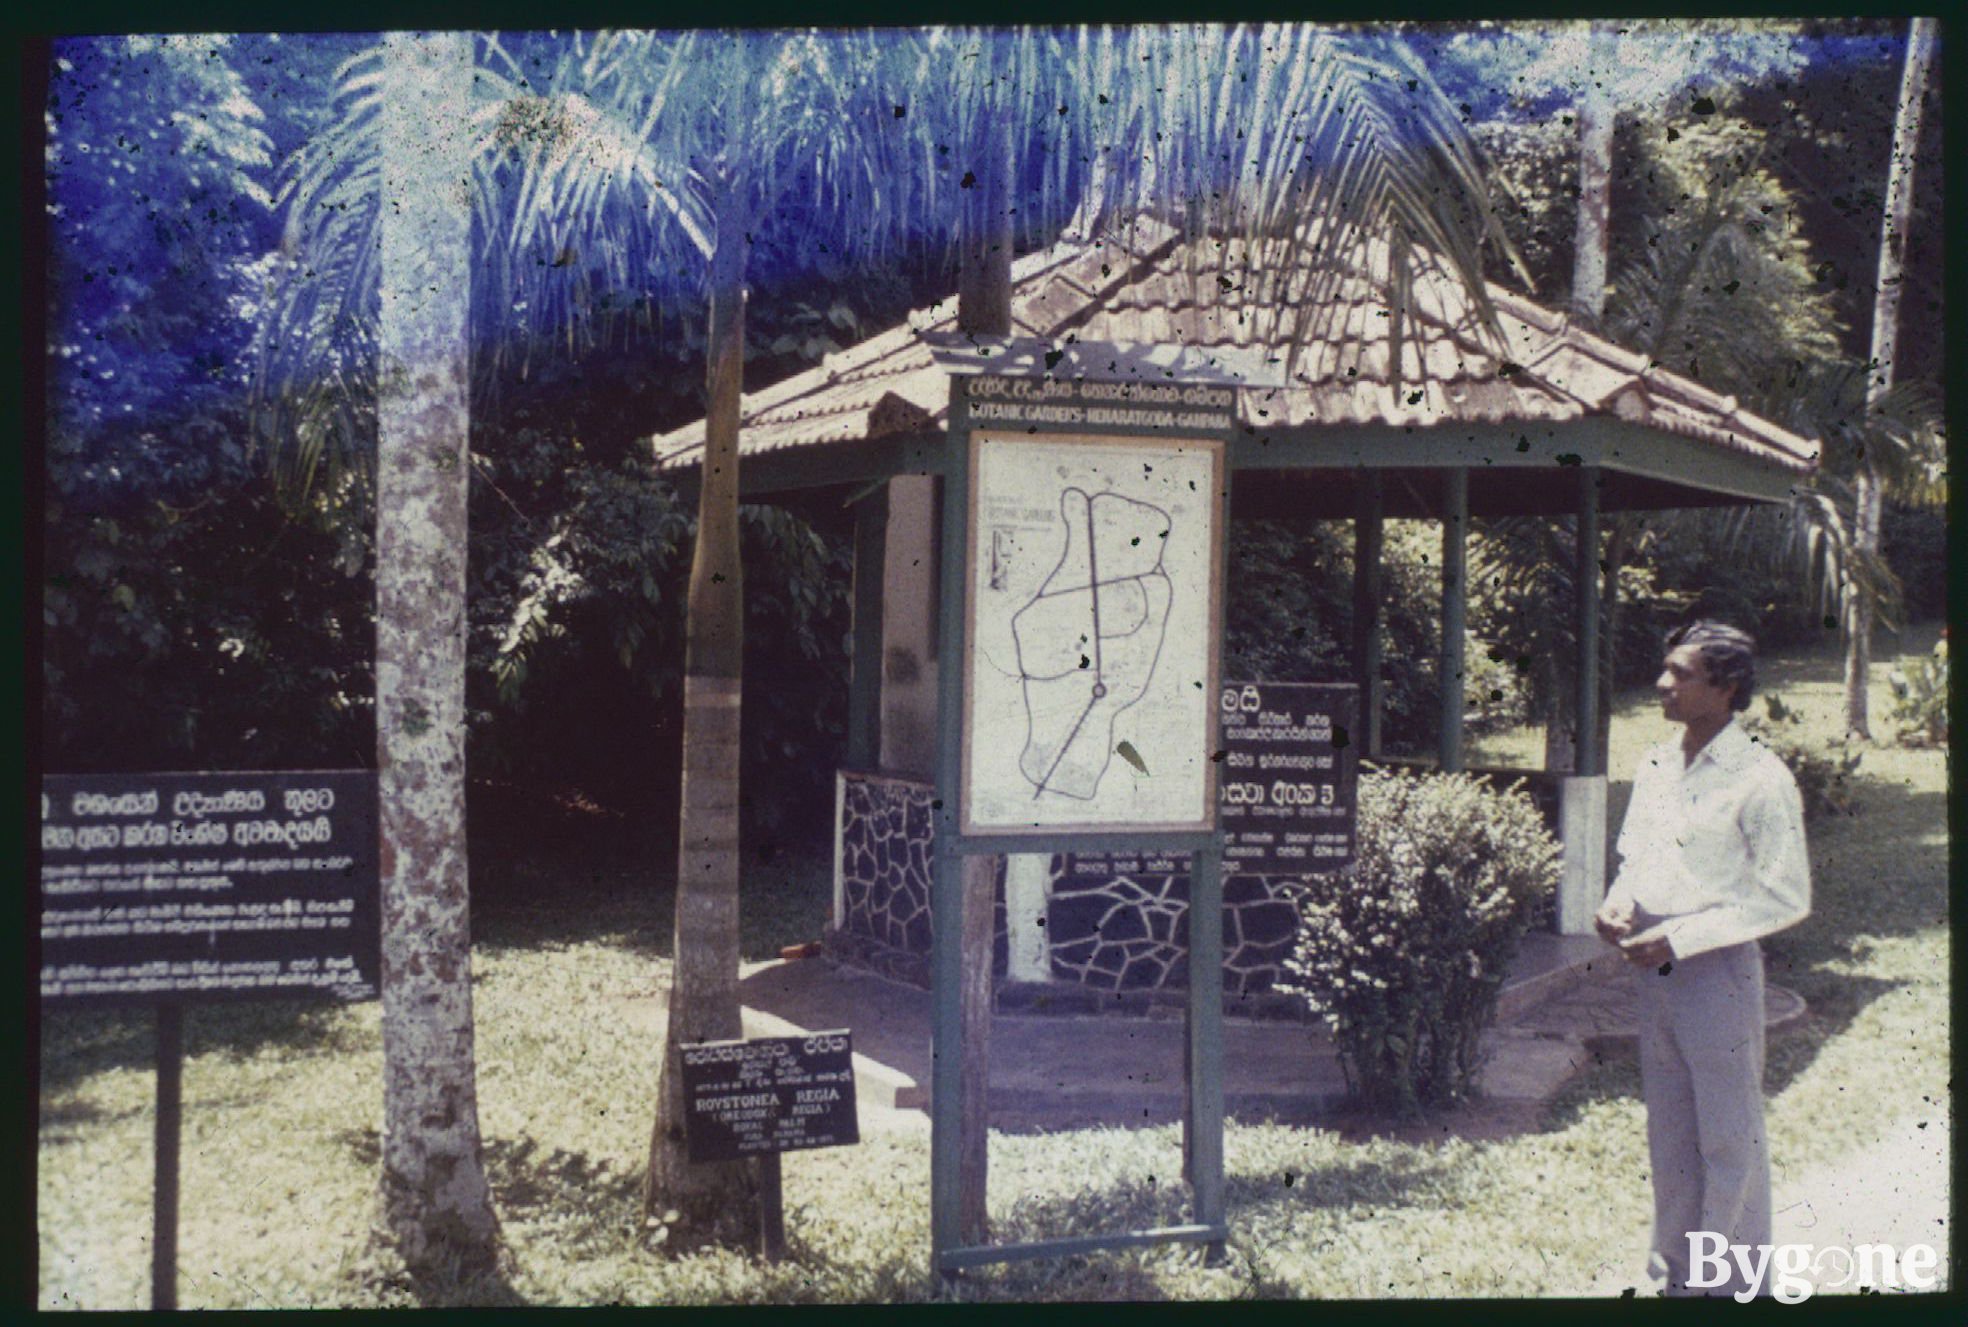 A Brown man with dark short curly hair, wearing a white shirt and light grey trousers is standing next to an entrance sign. The sign reads Botanic Gardens - Henaratgoda - Gampara and depicts a simple line map of the site. A large gazebo can be seen just behind the man and sign. The slide has incurred some damage or possible light leak, turning the top edge of the image an eclectic blue with a scattering of black spots.